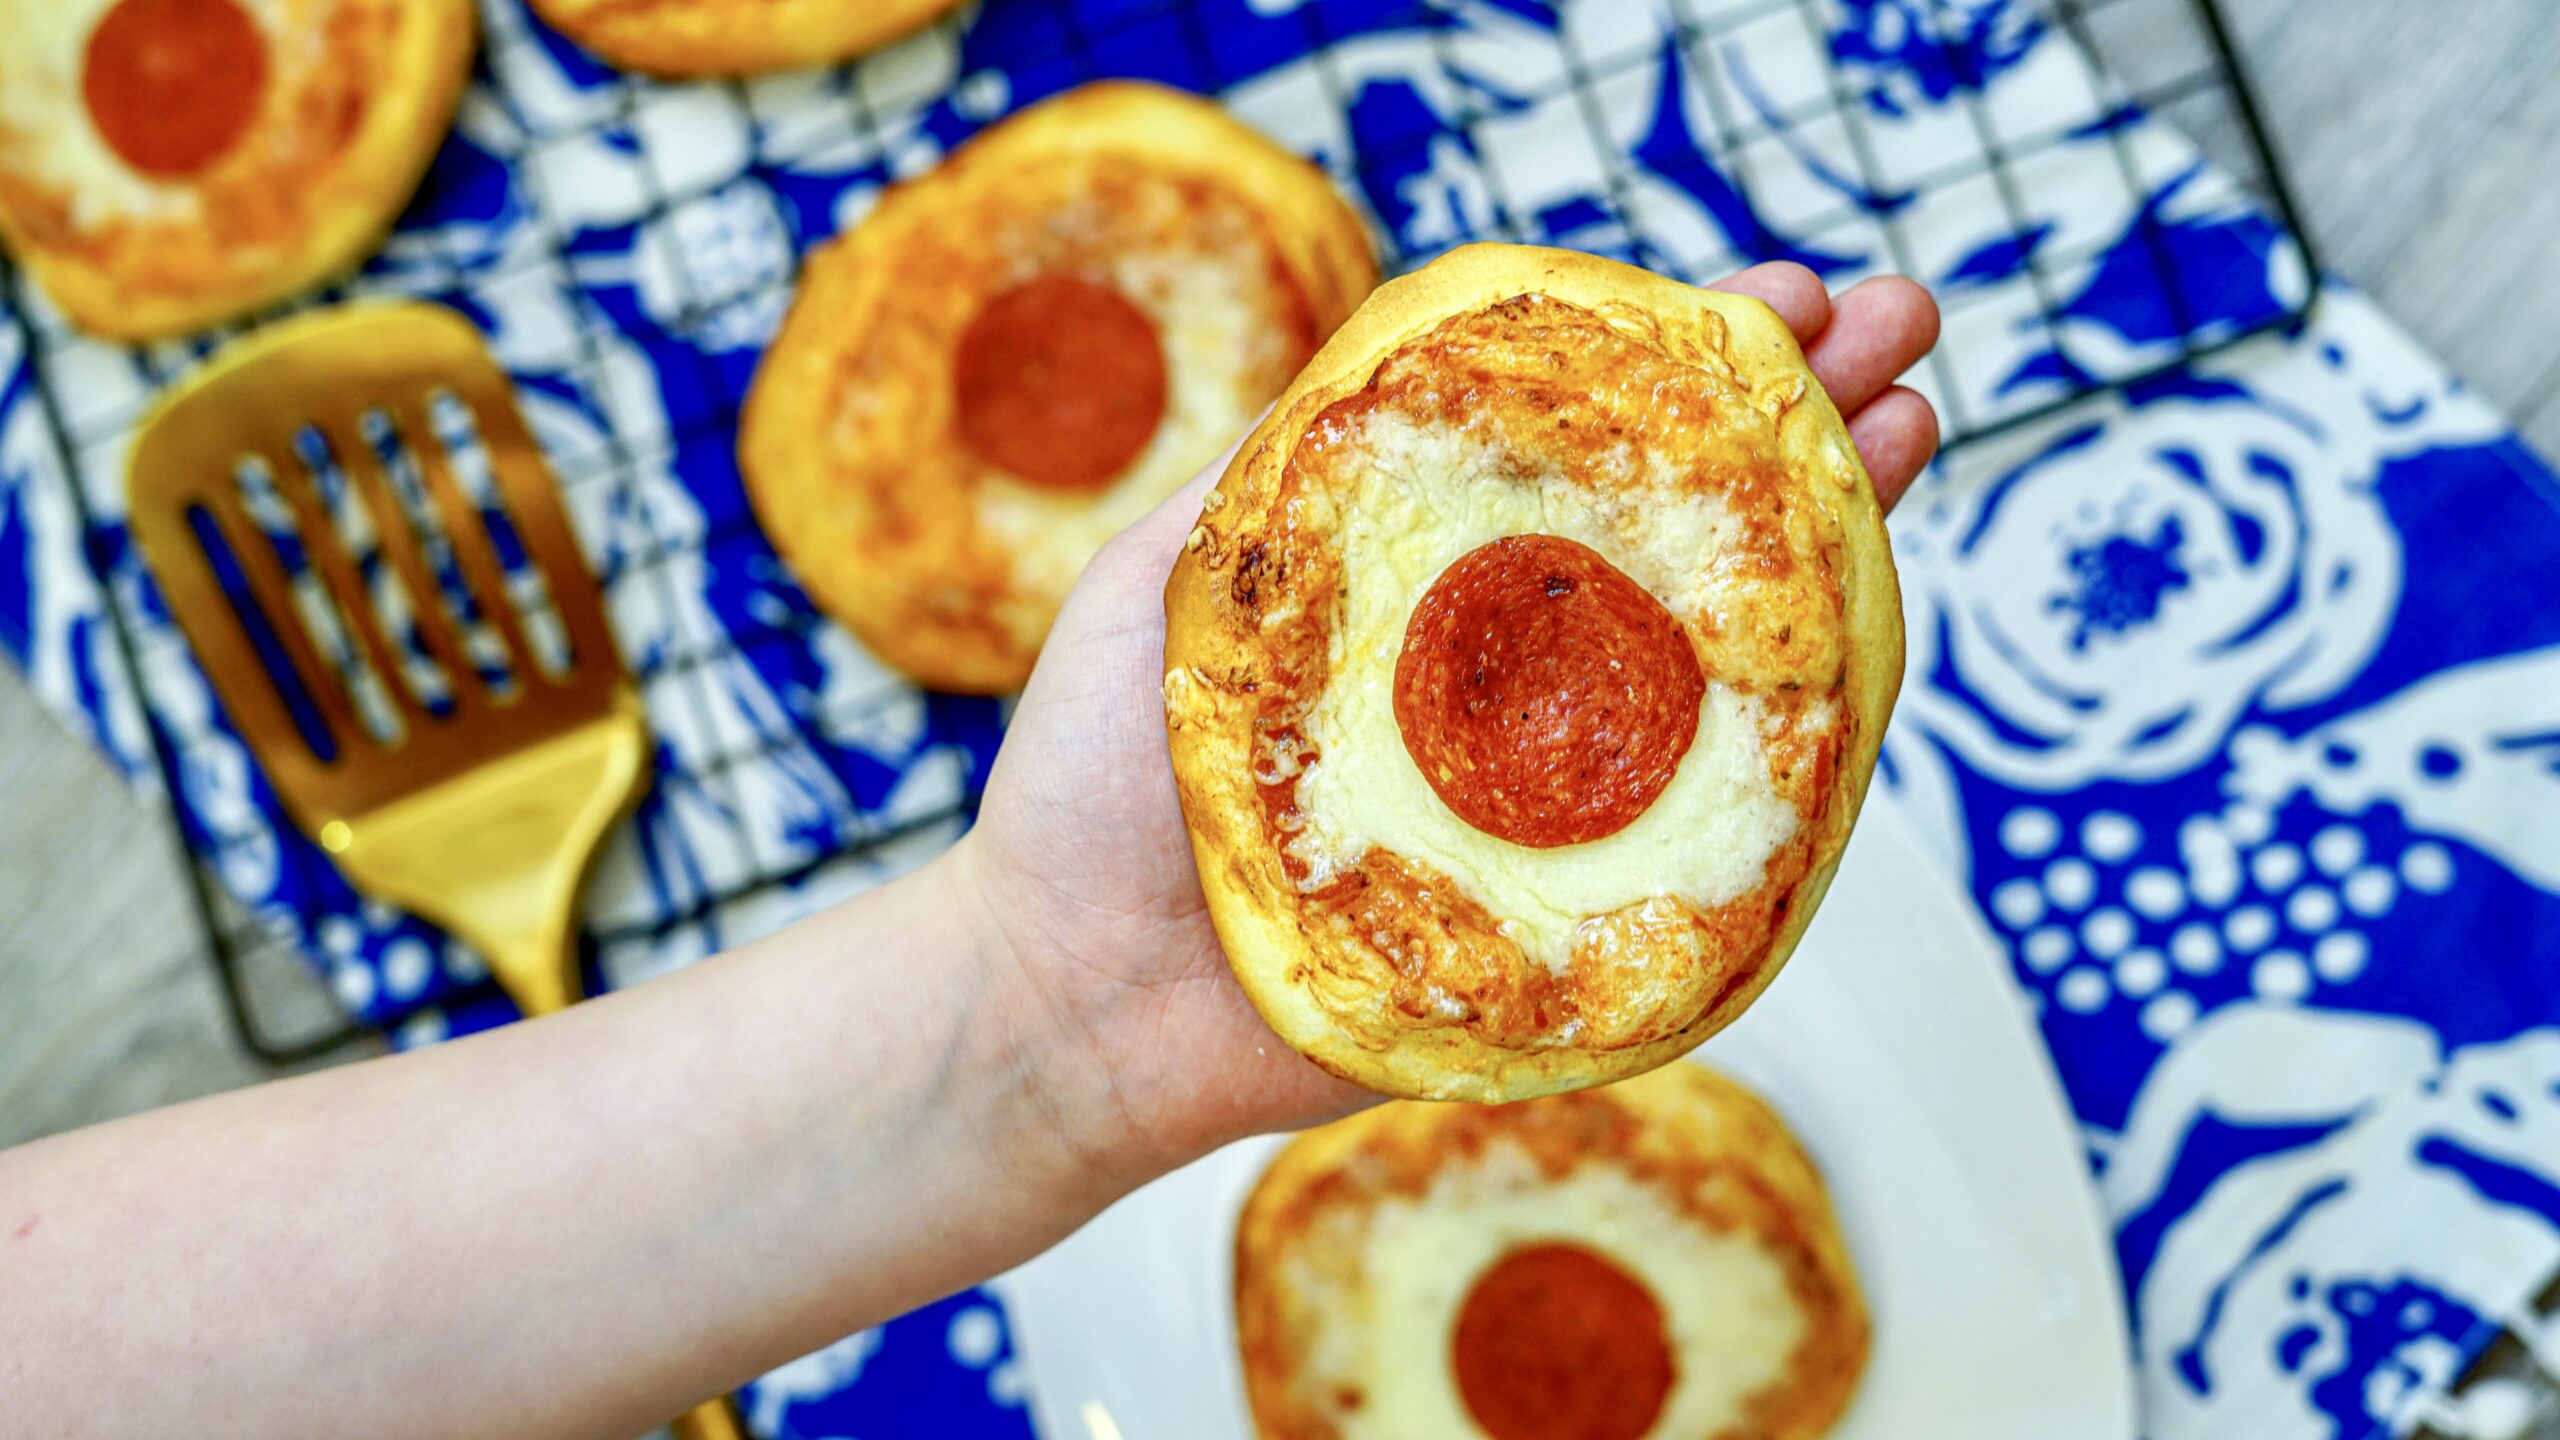 https://mommyhoodlife.com/wp-content/uploads/2023/05/How-to-make-Air-Fryer-Biscuit-Pizza-scaled.jpg